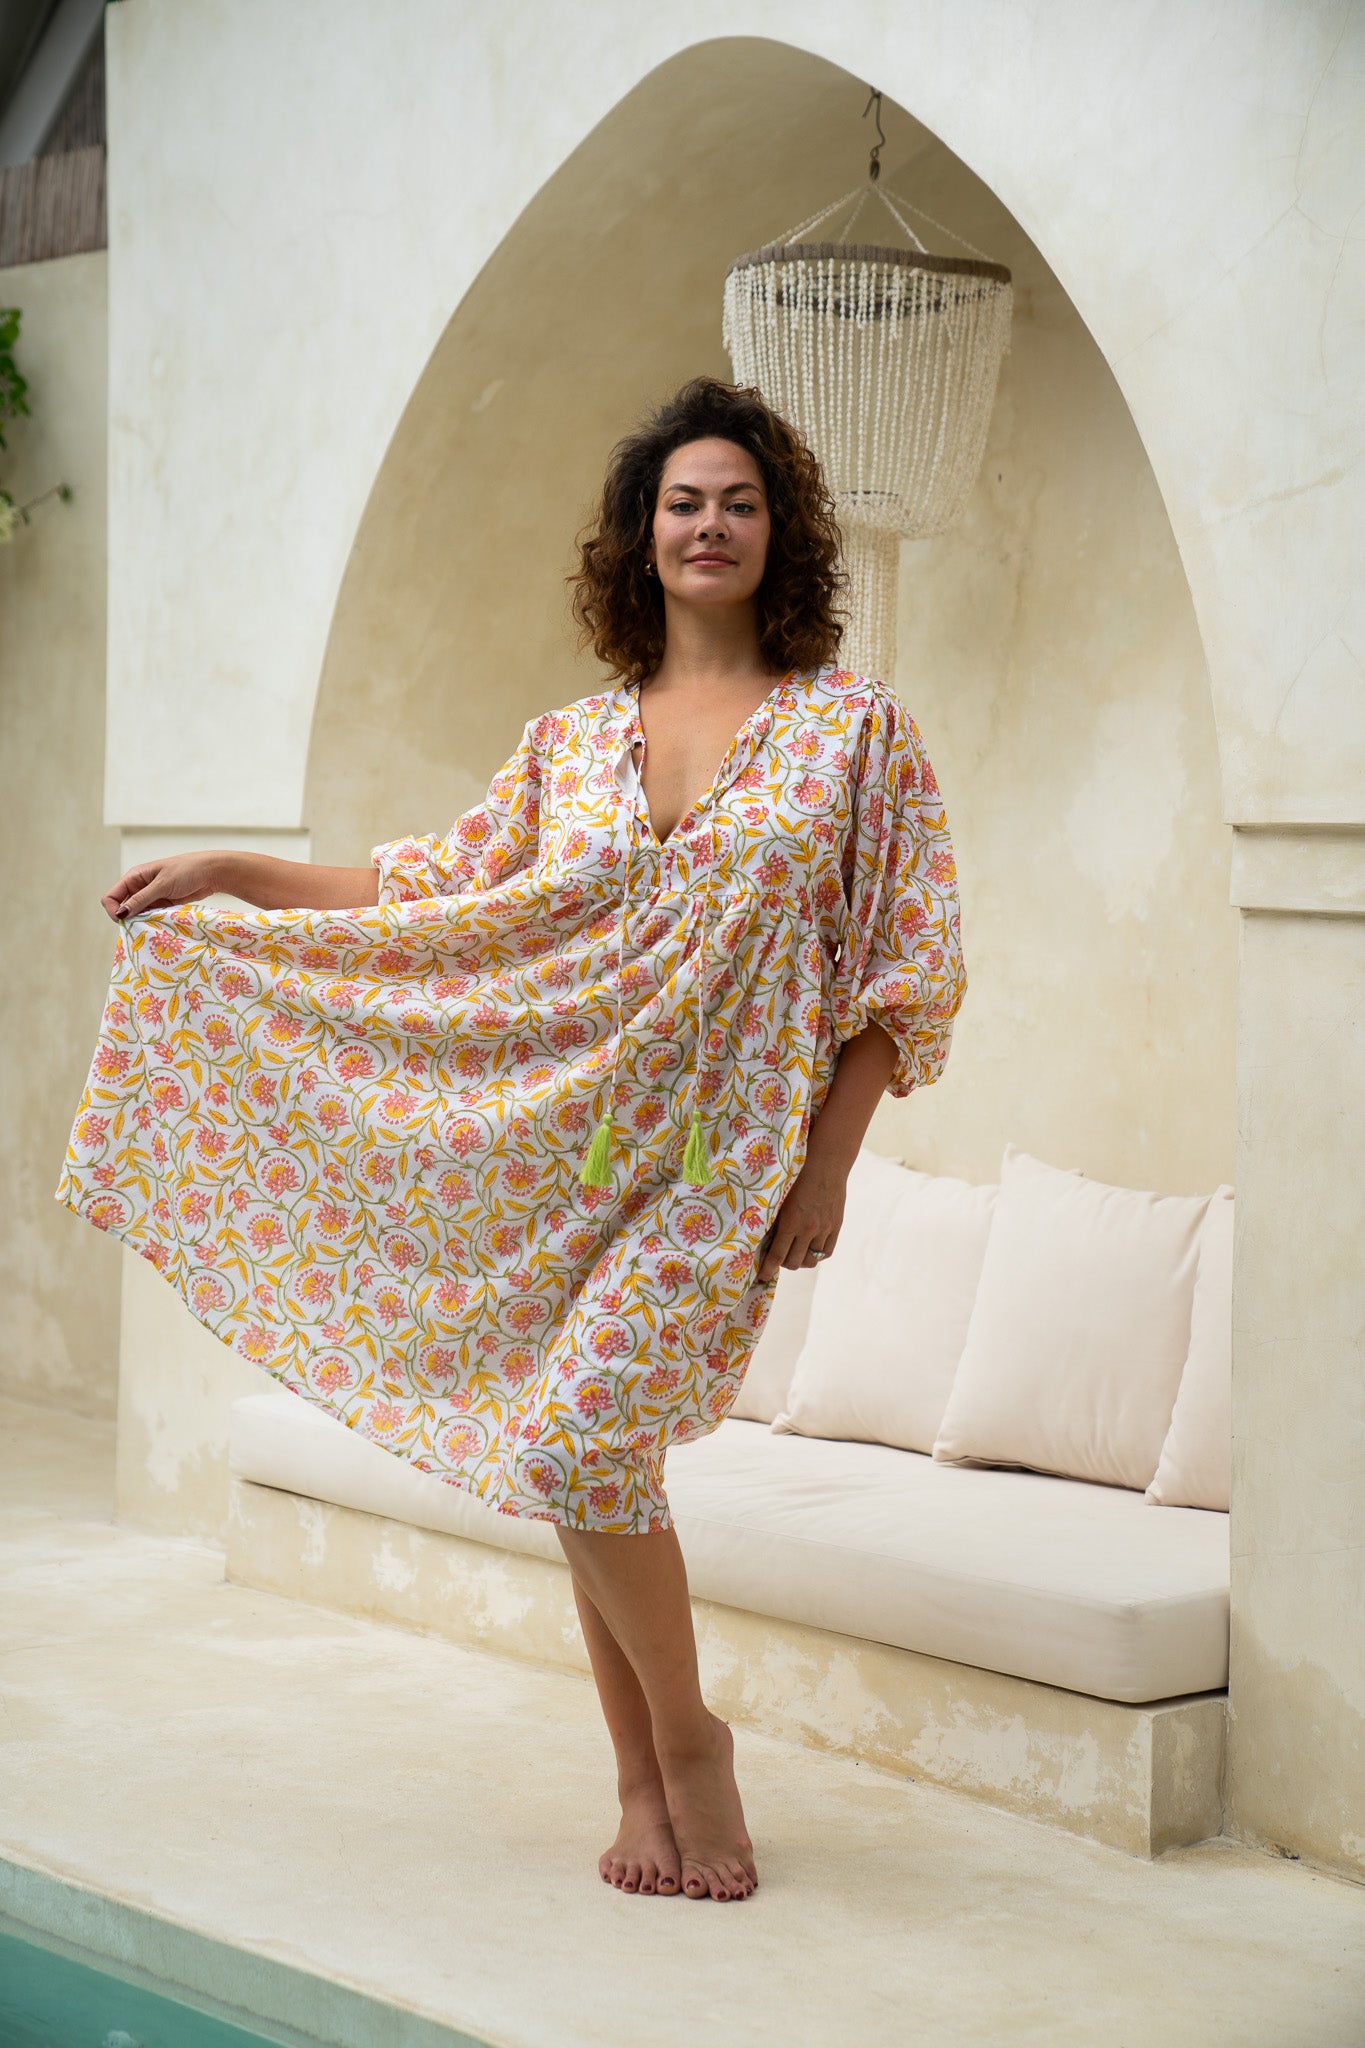 "Pincushion bloom cotton dress: Effortlessly chic and feminine, this midi dress is a must-have for your summer wardrobe."